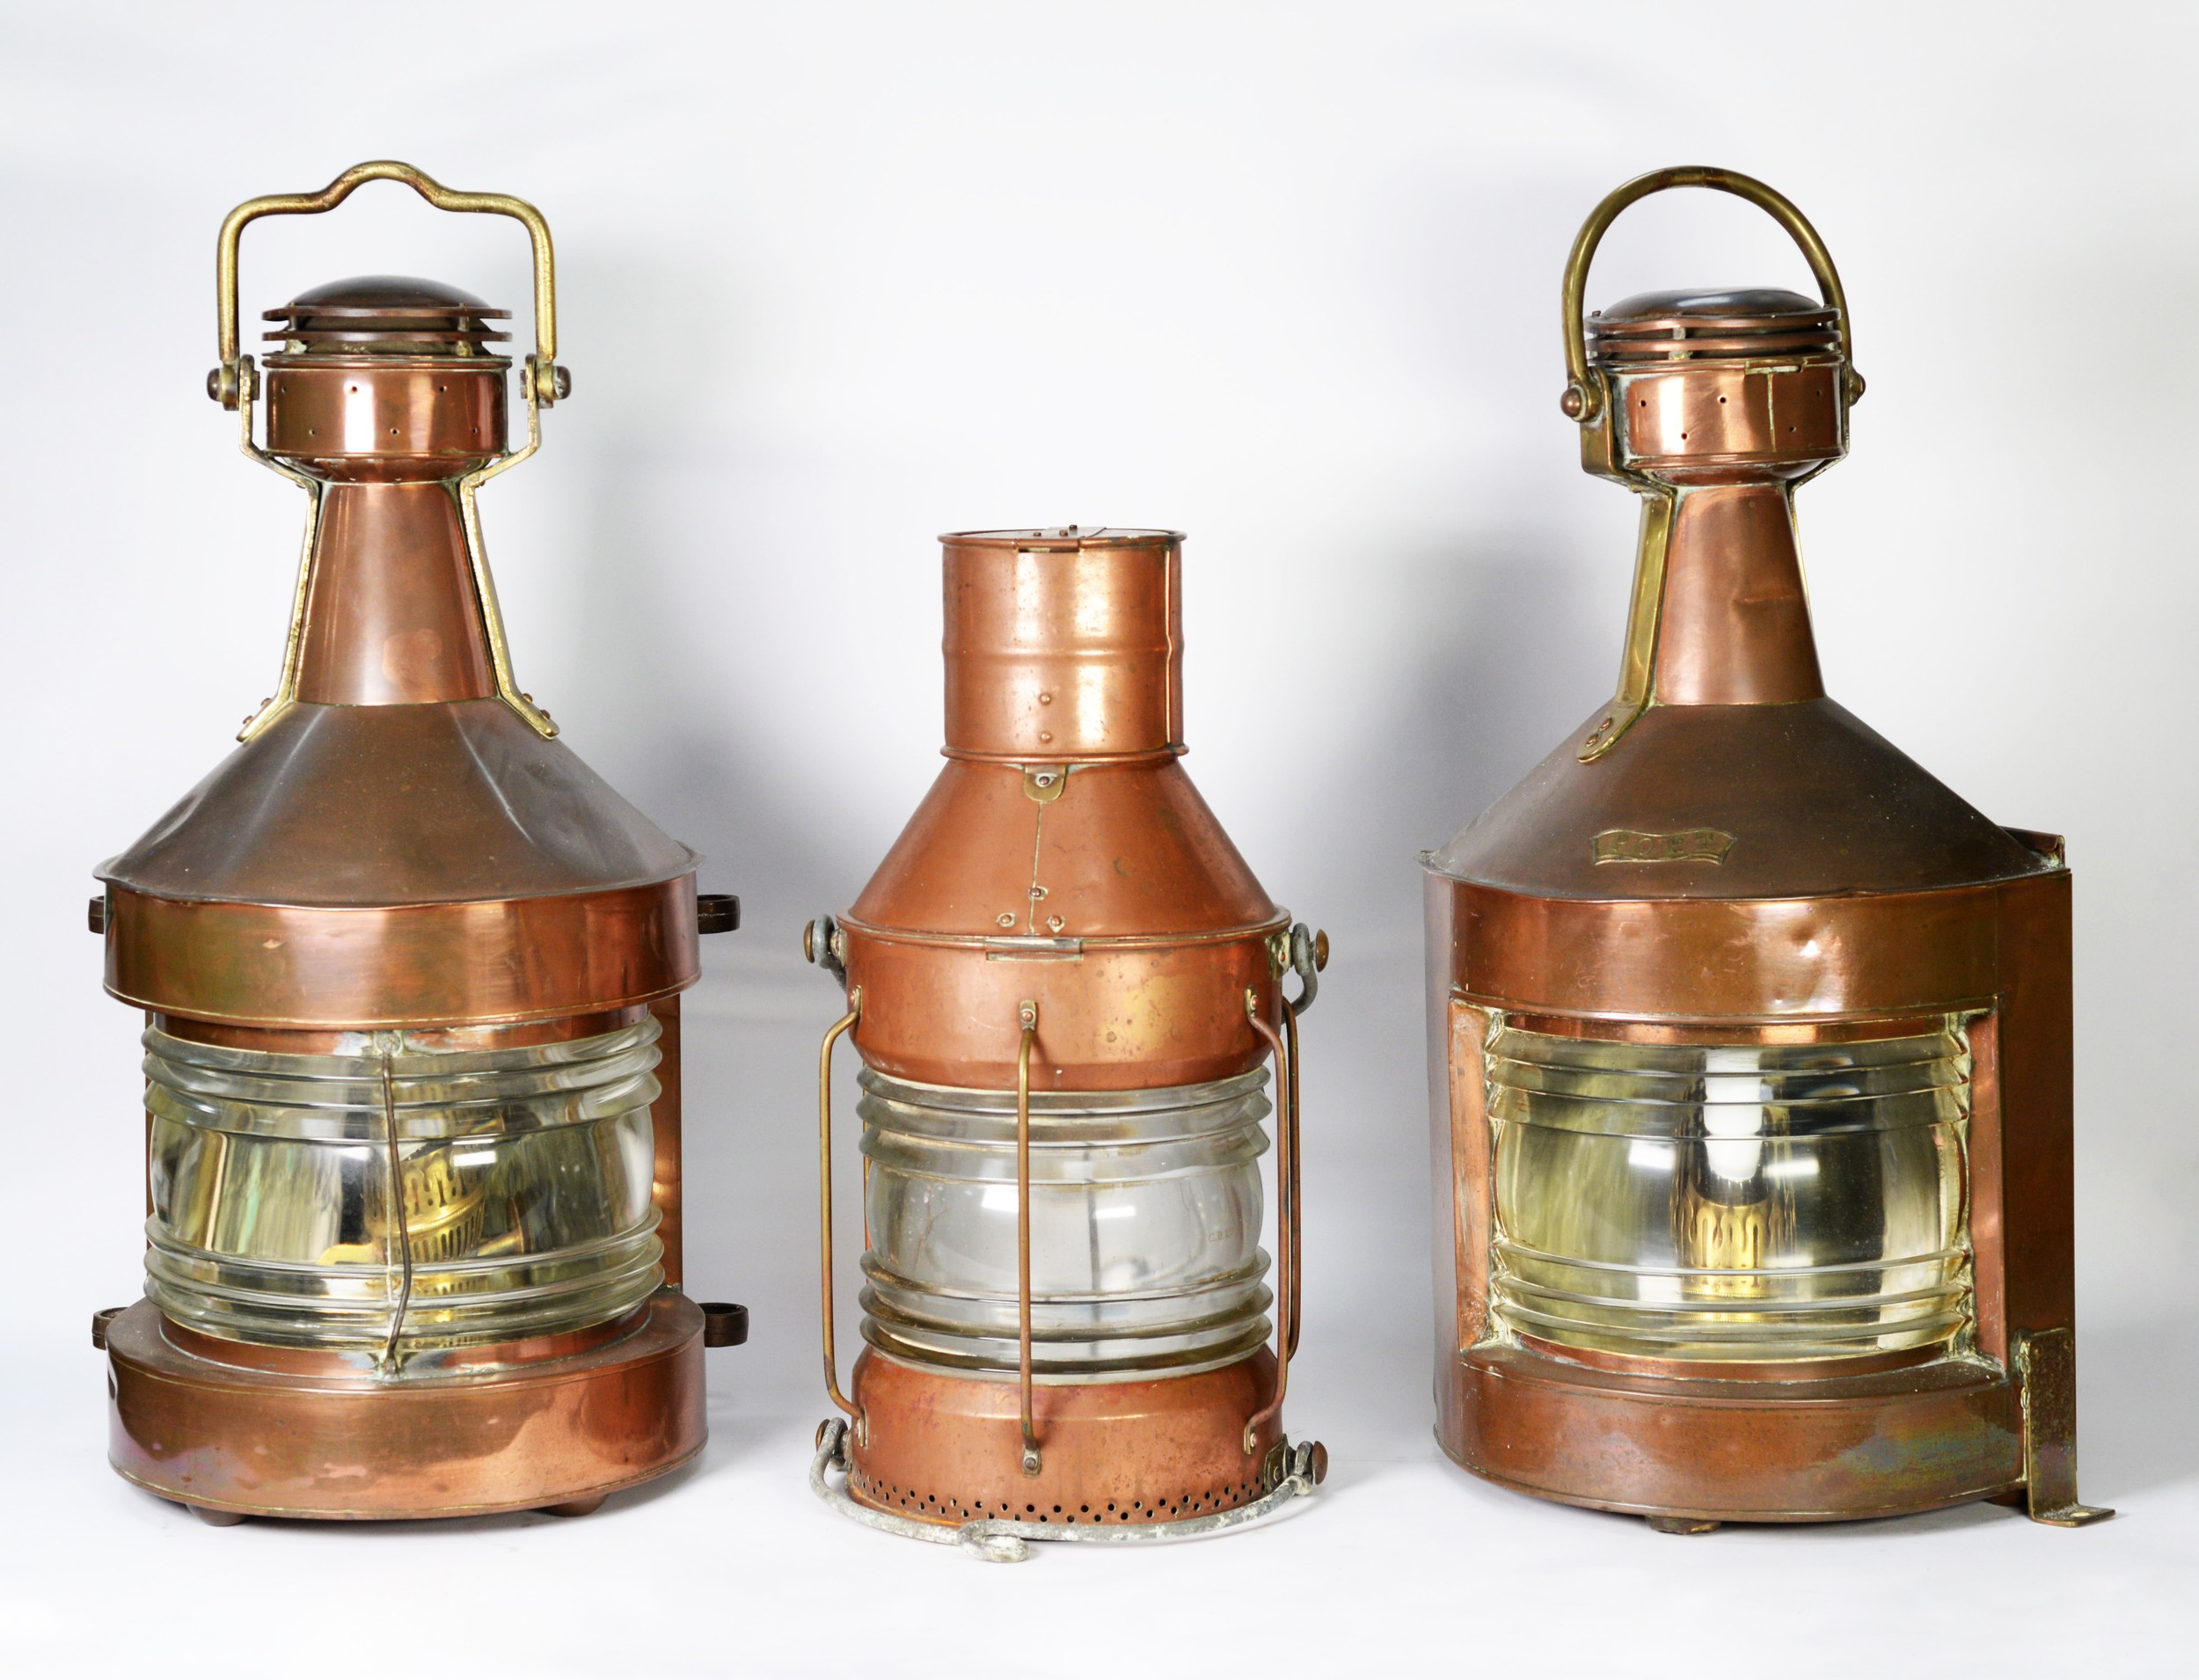 MARITIME INTEREST: three 20th century copper mast lamps, including a central lamp, port side lamp,